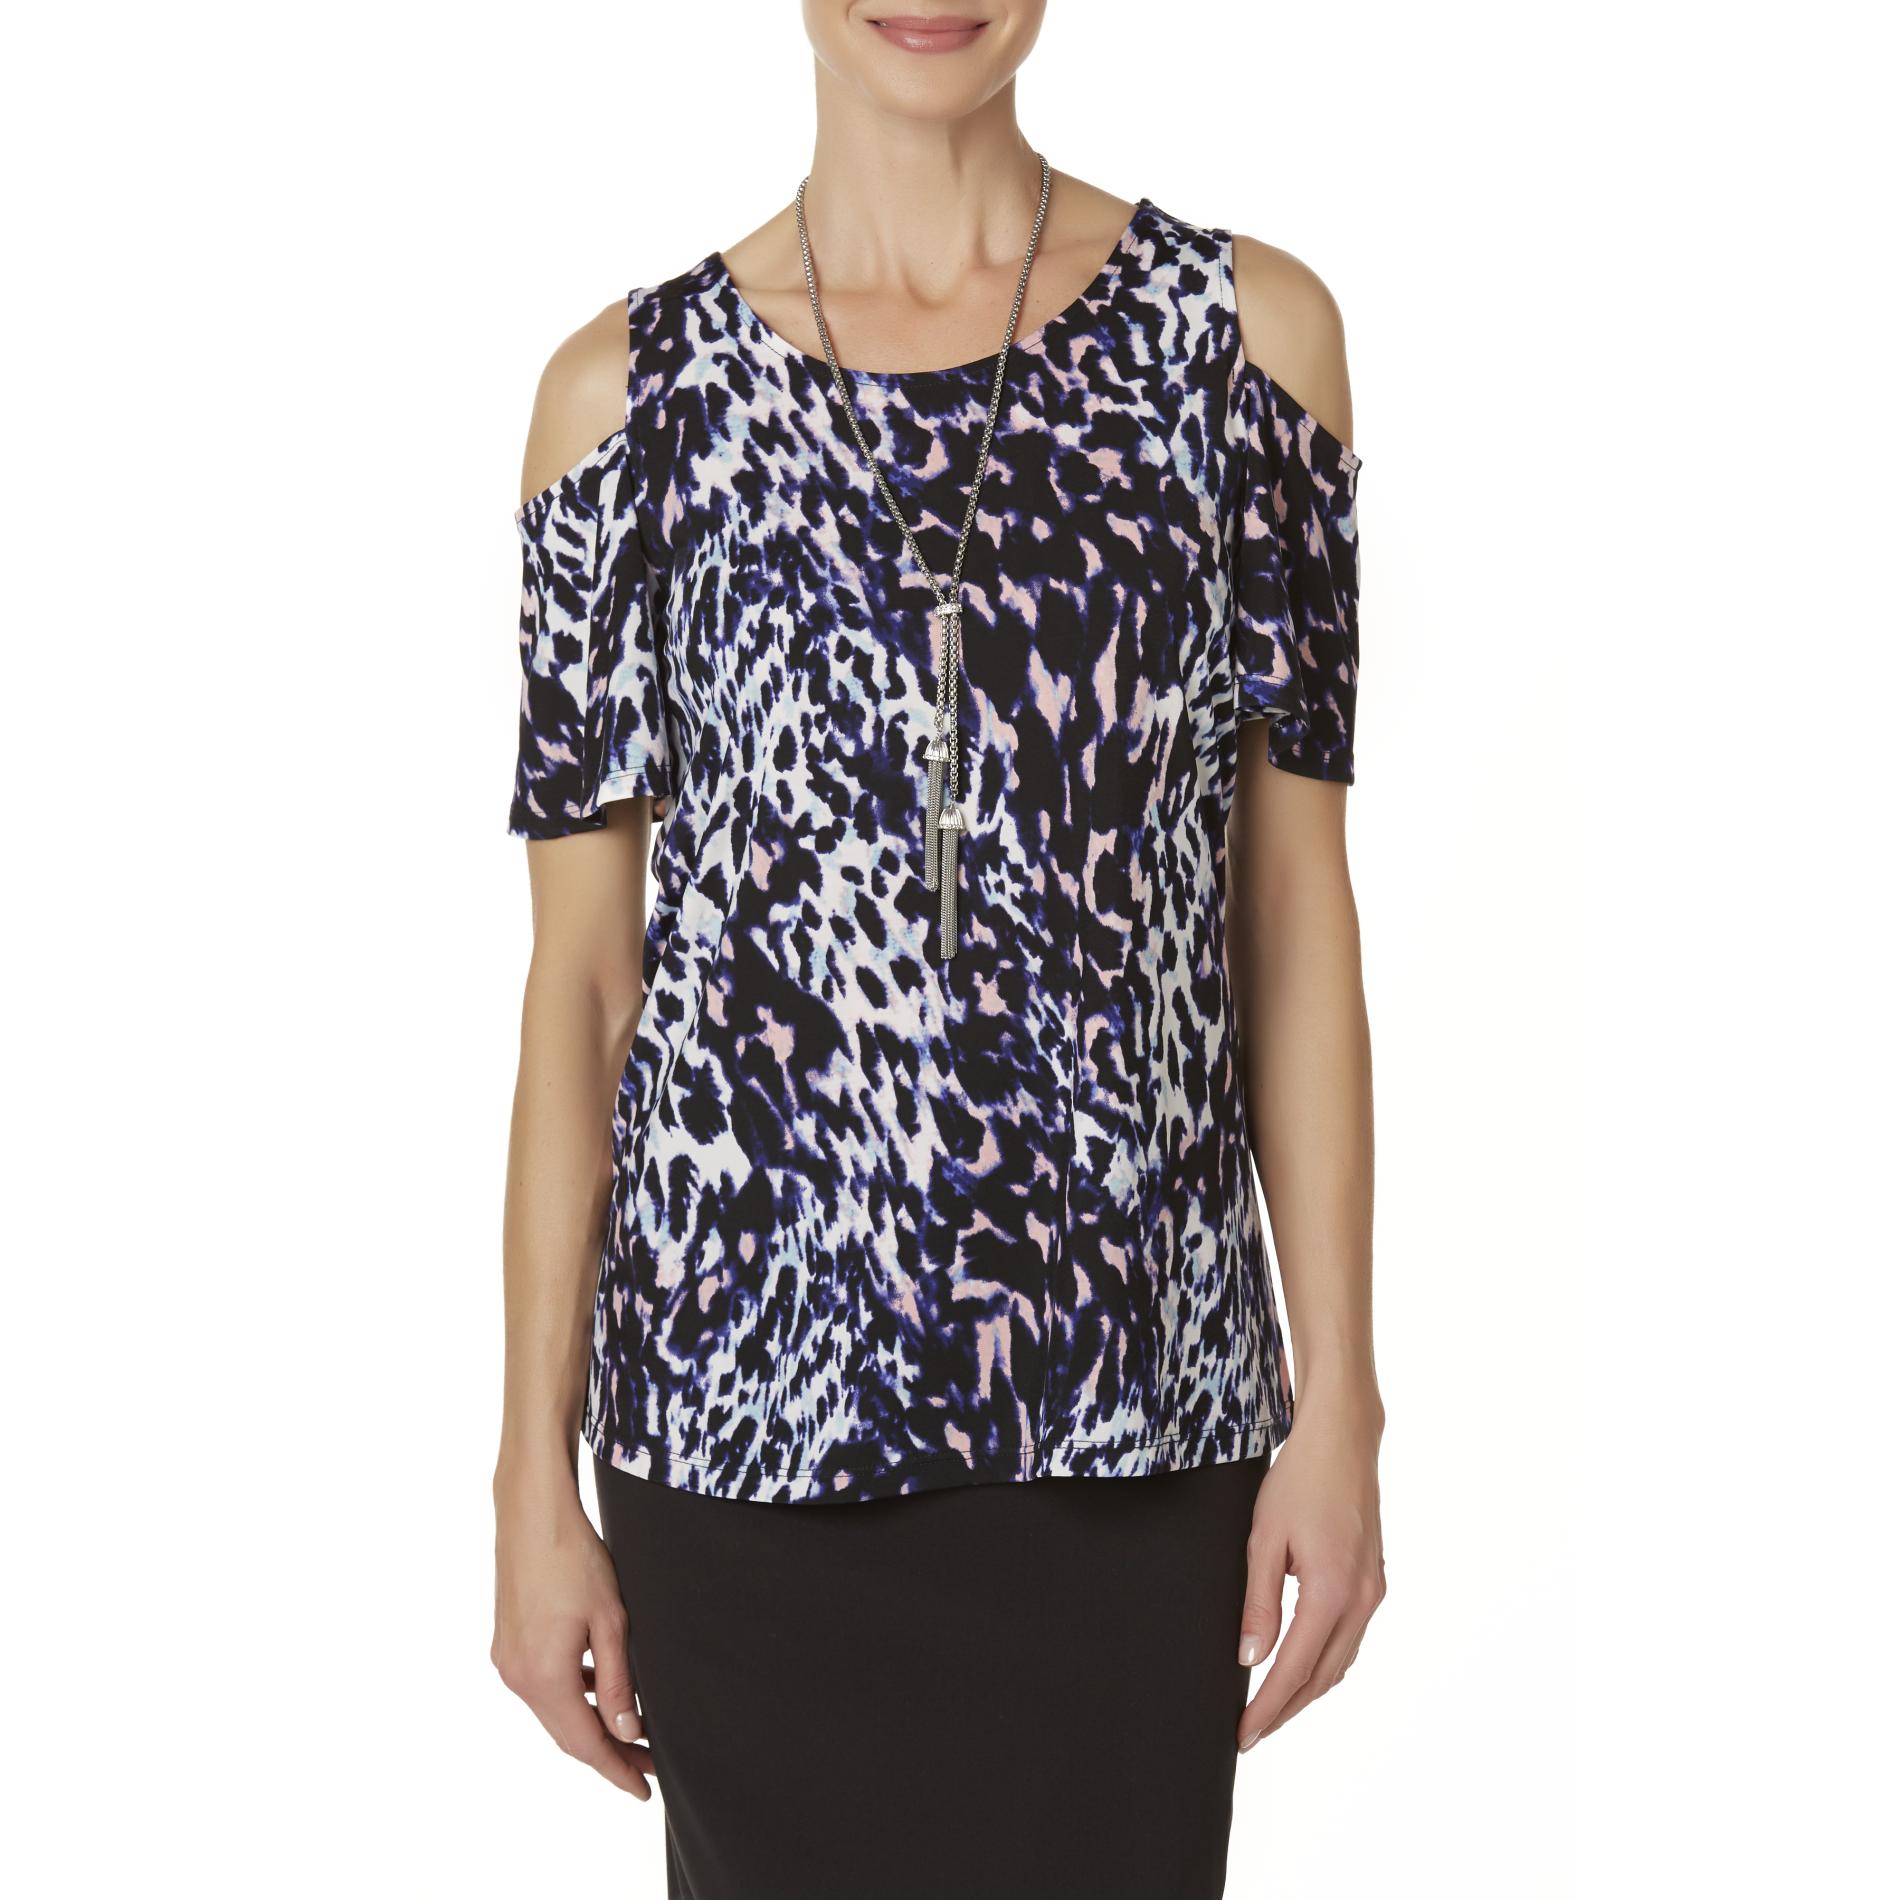 Jaclyn Smith Women's Cold Shoulder Top - Animal Print